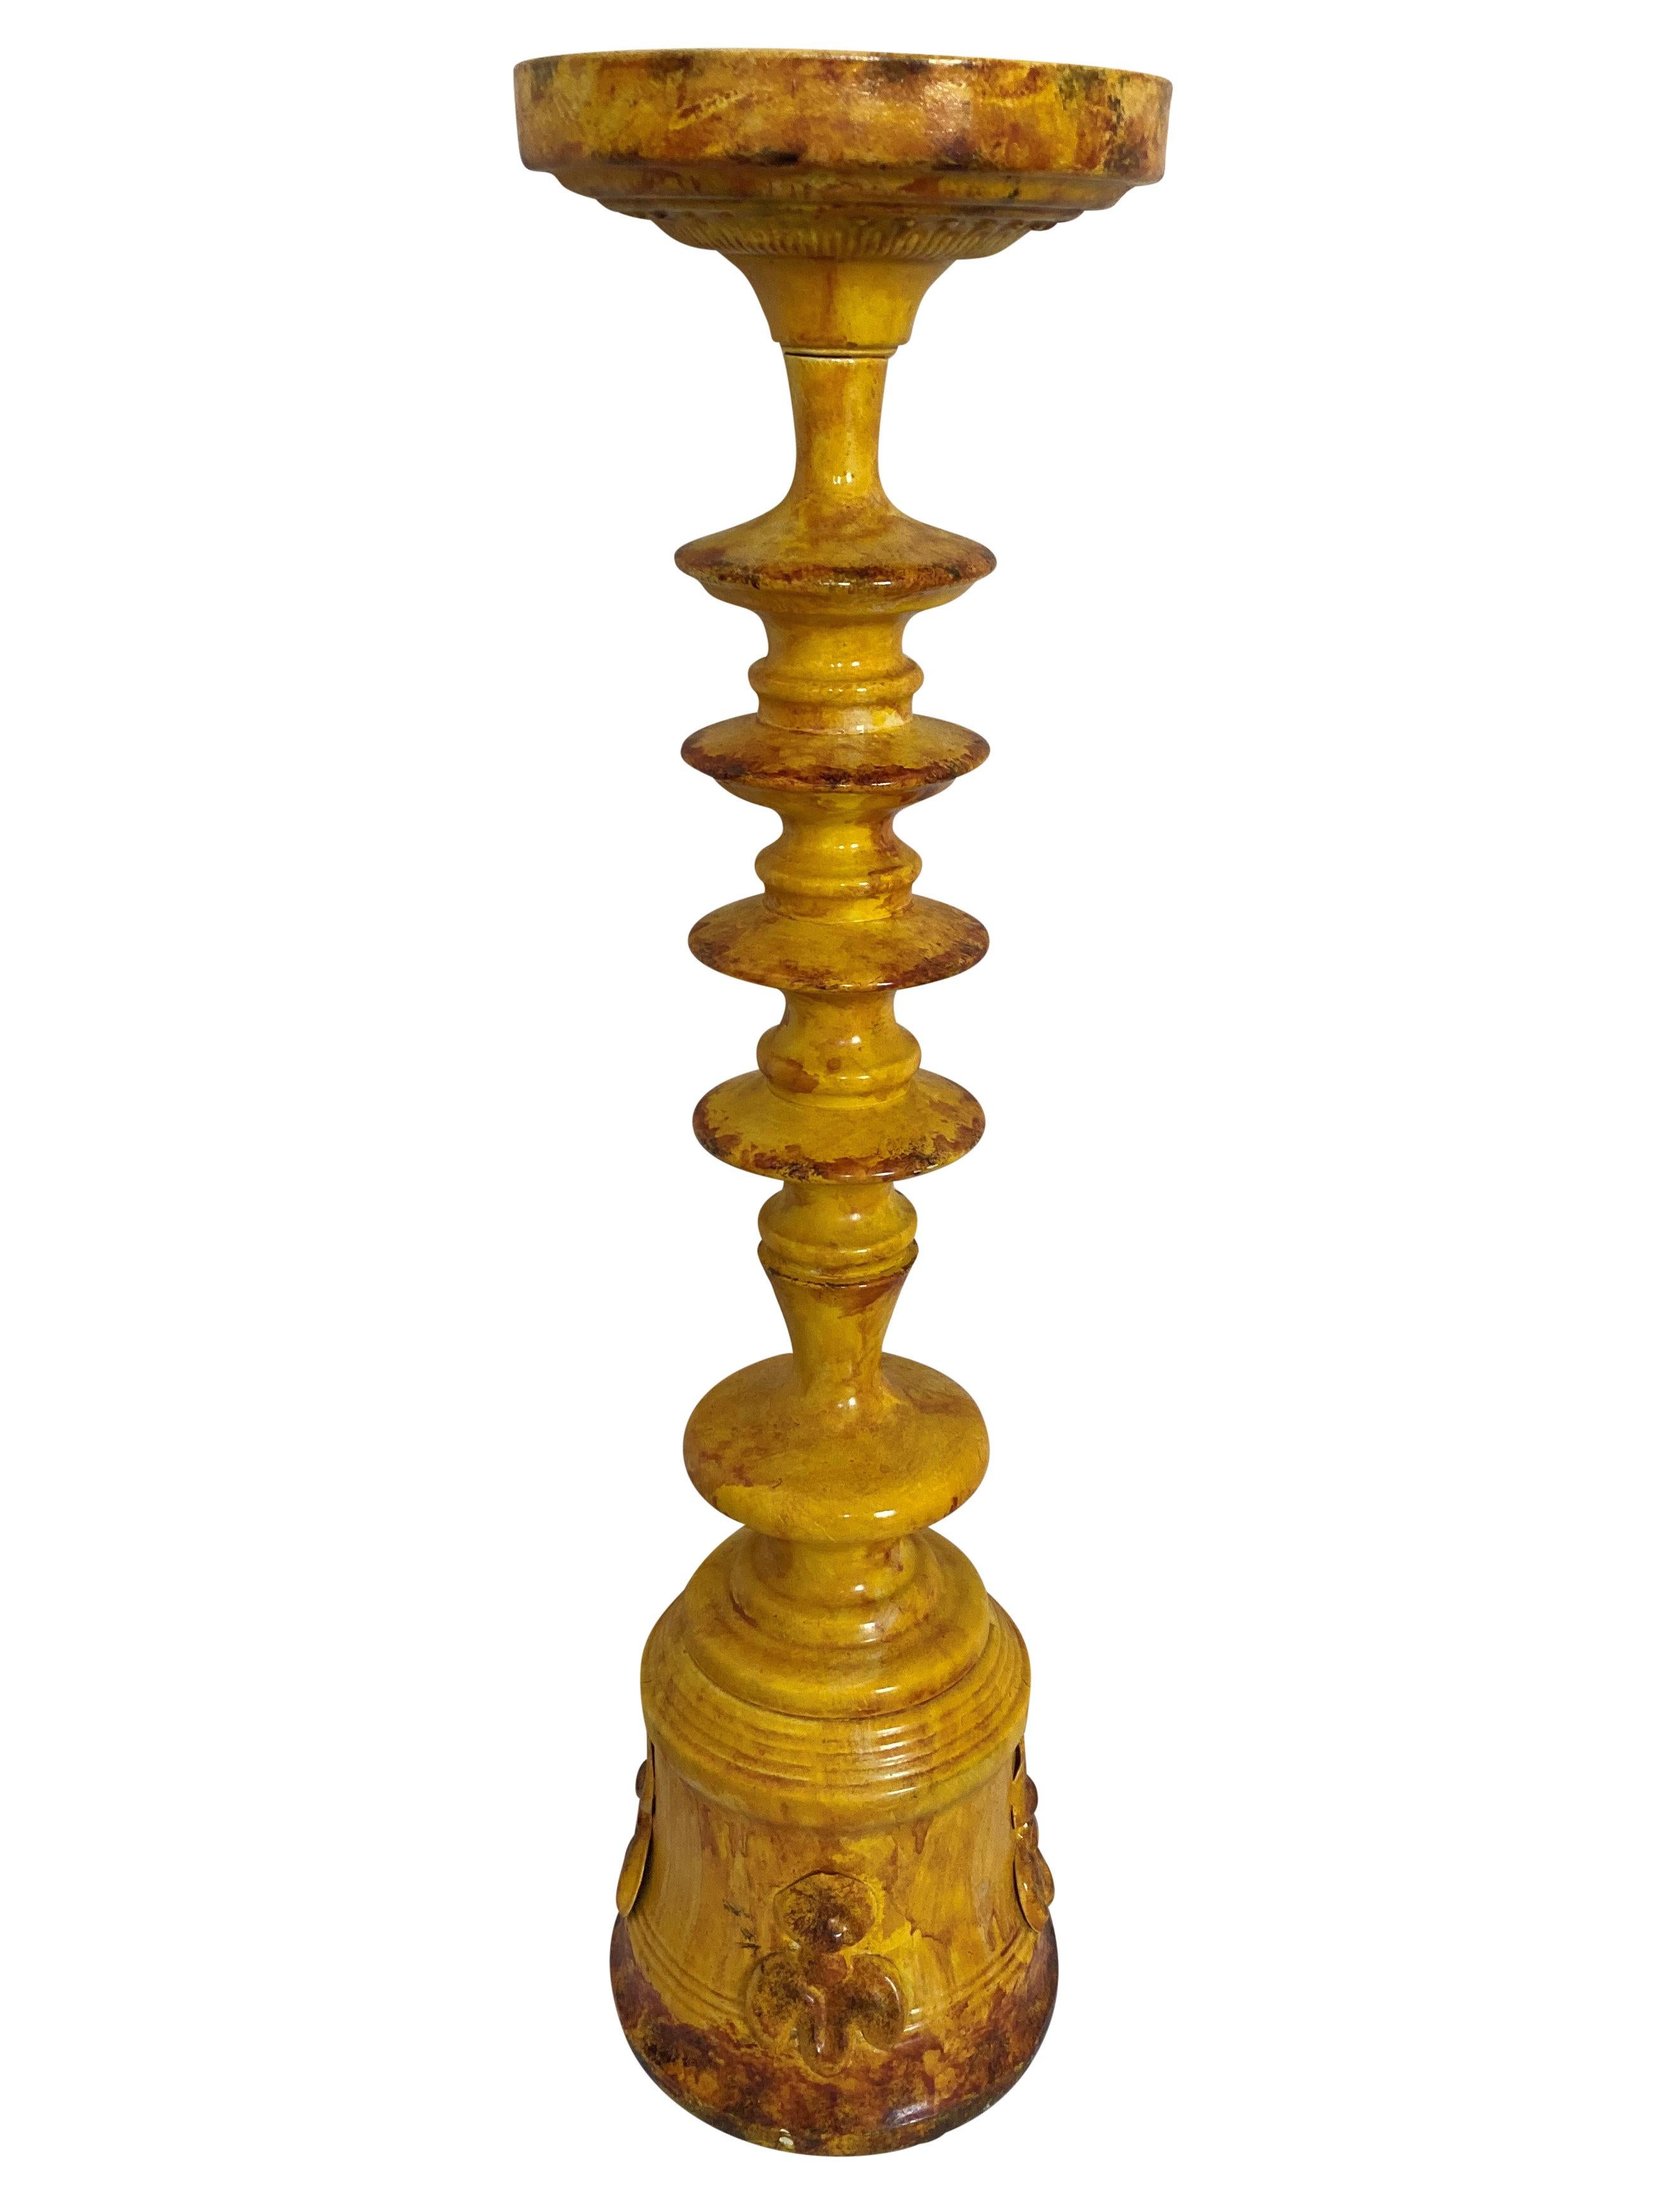 A pair of large Portuguese tole-ware candlesticks, hand painted in yellow and burnt Sienna.